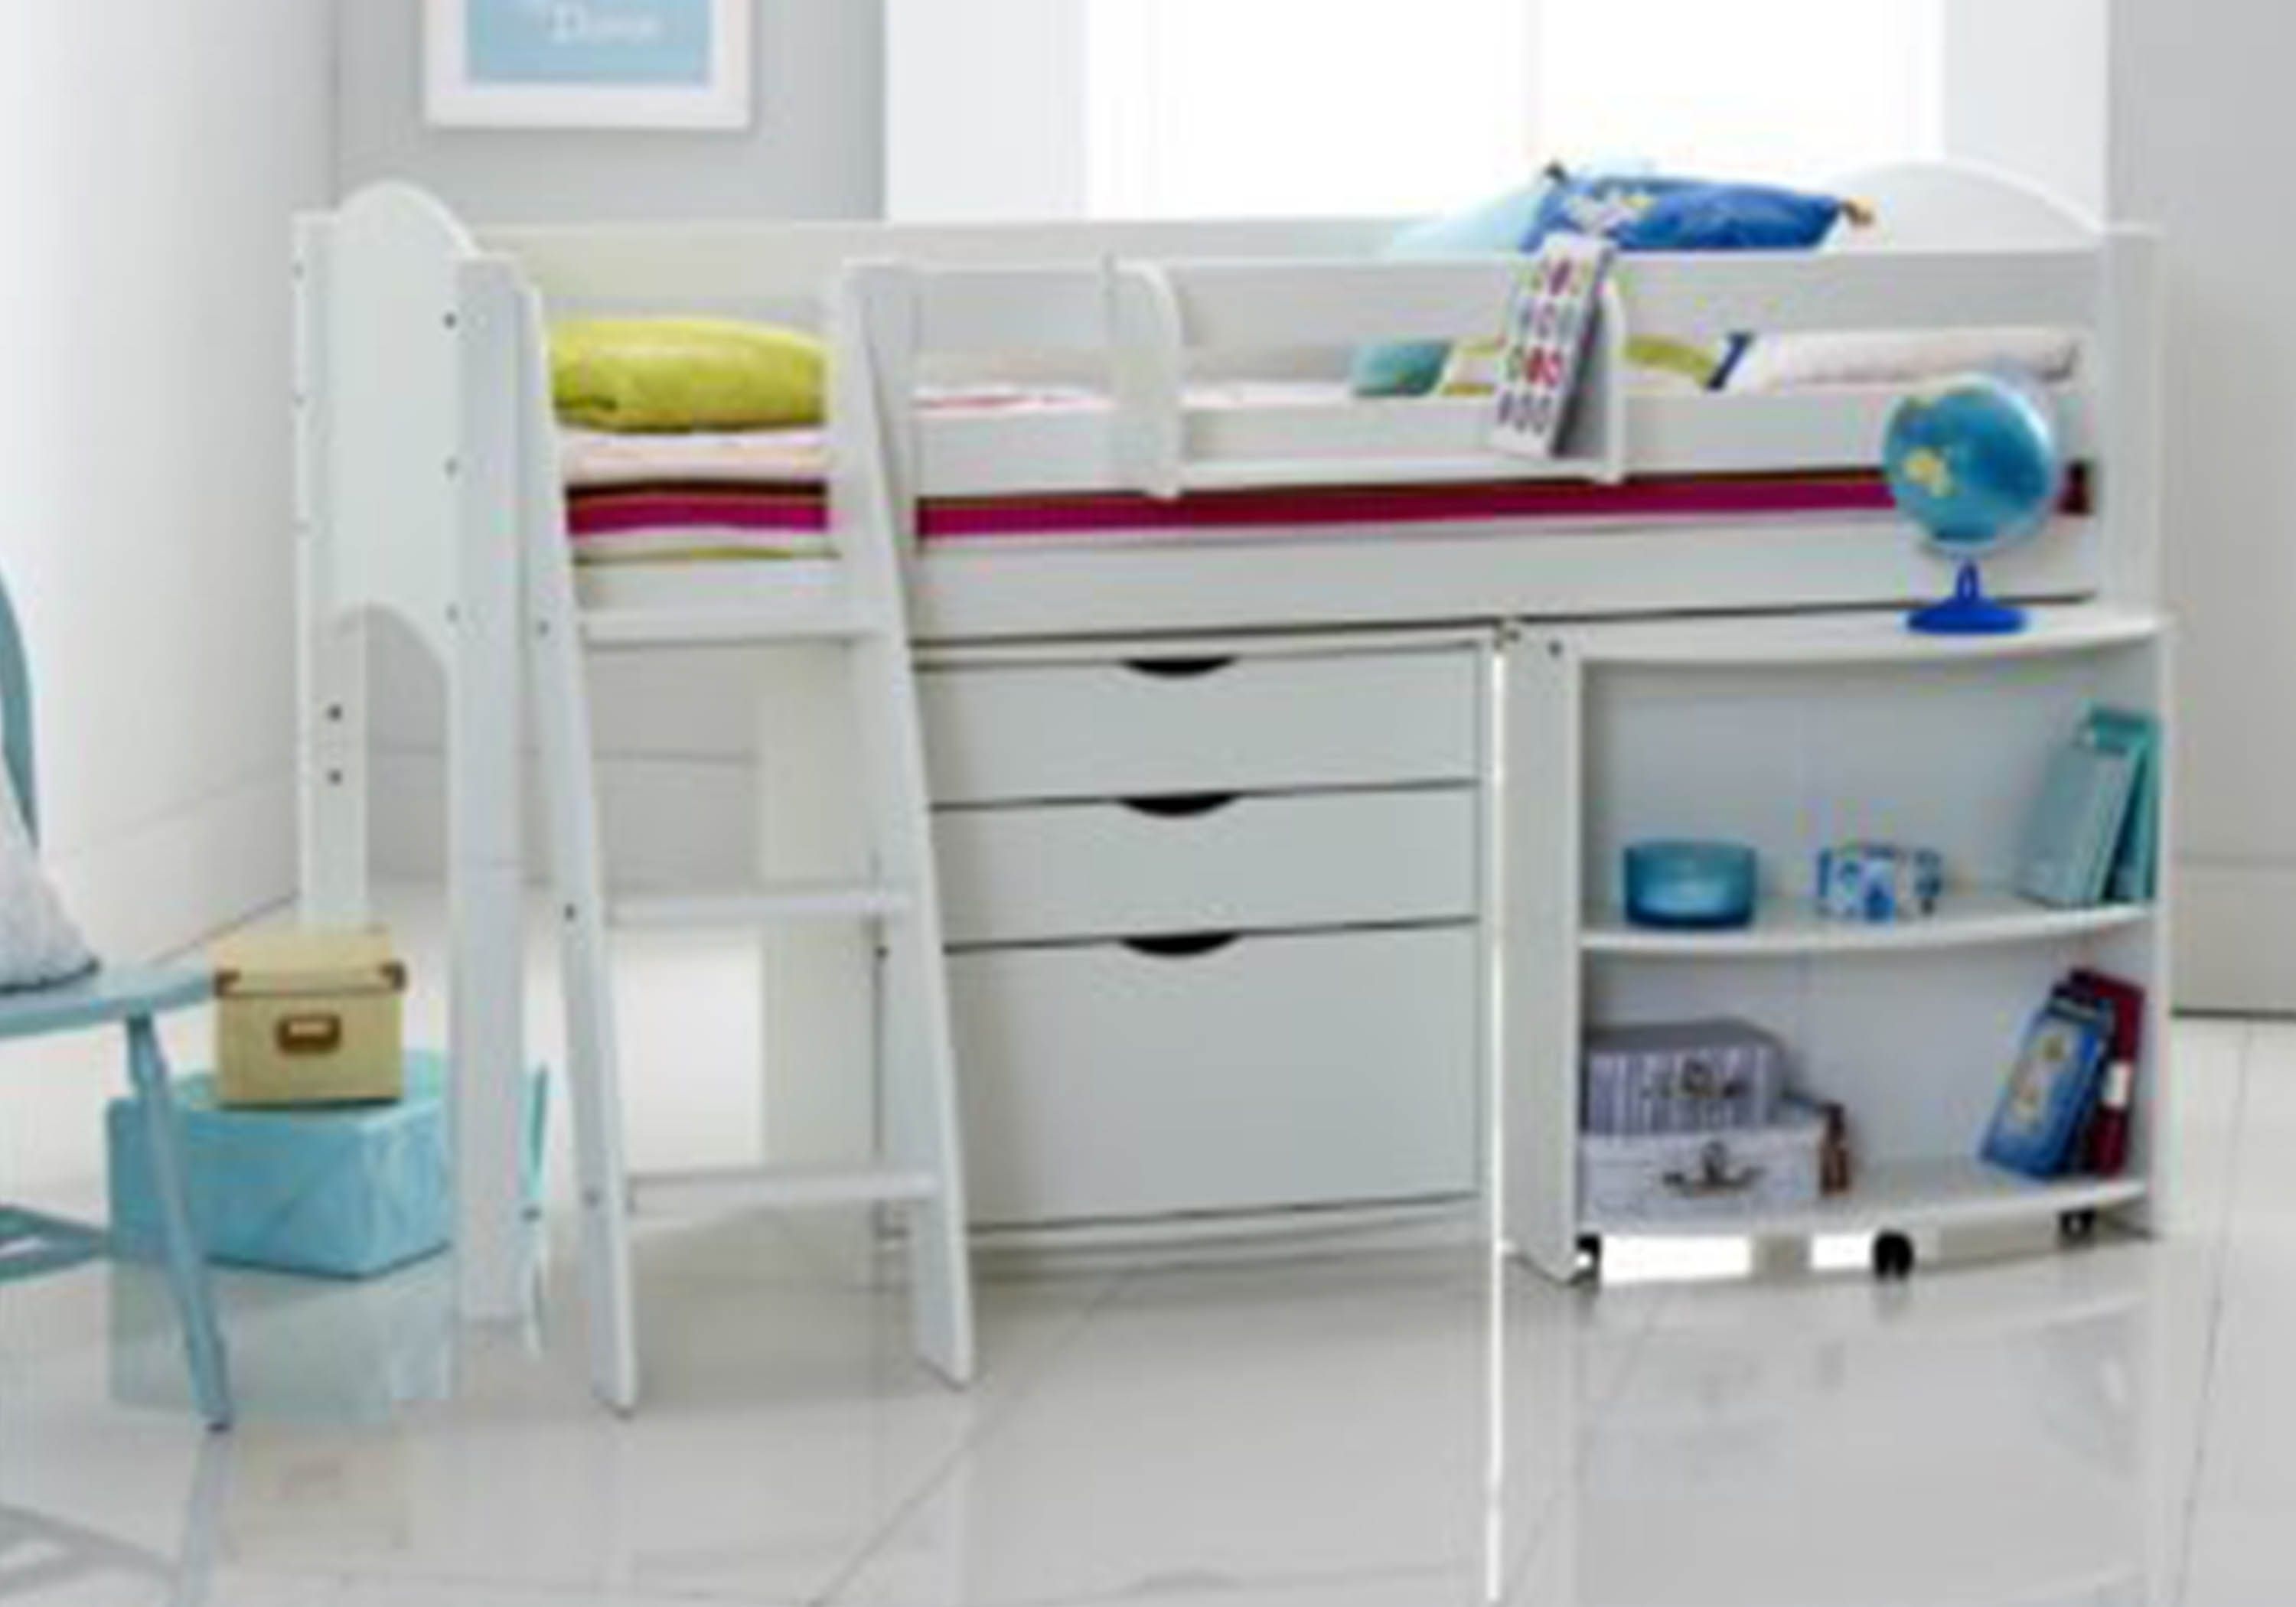 cabin bed with pull out desk